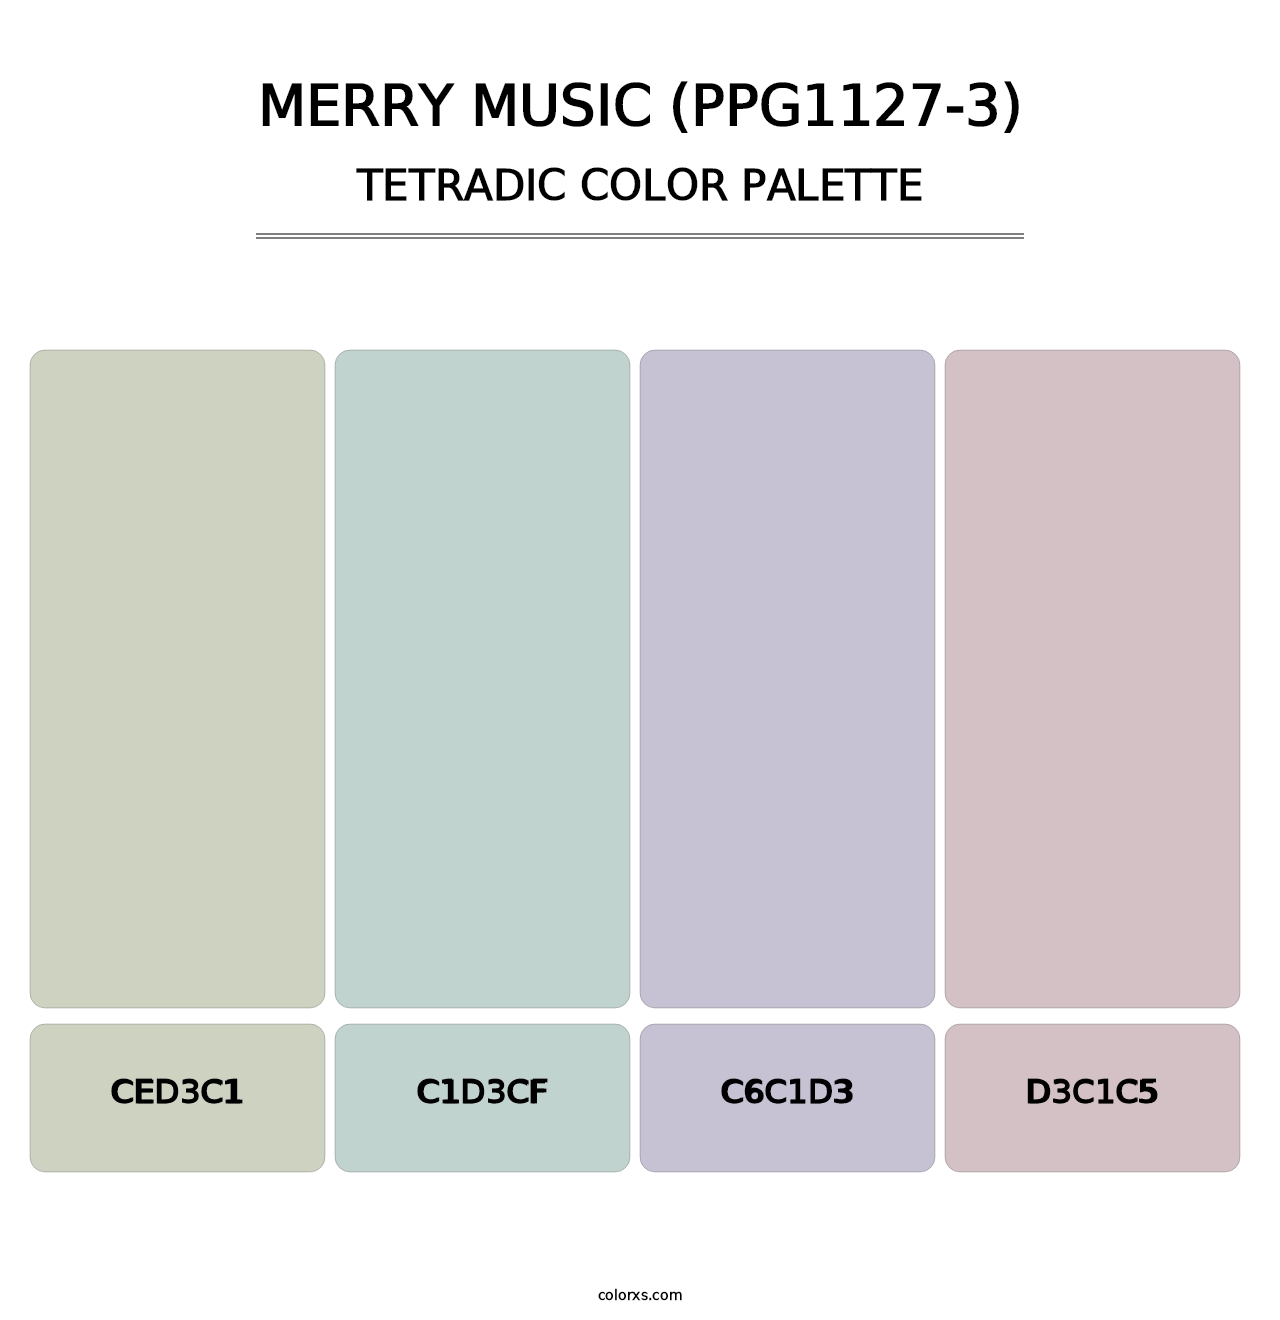 Merry Music (PPG1127-3) - Tetradic Color Palette